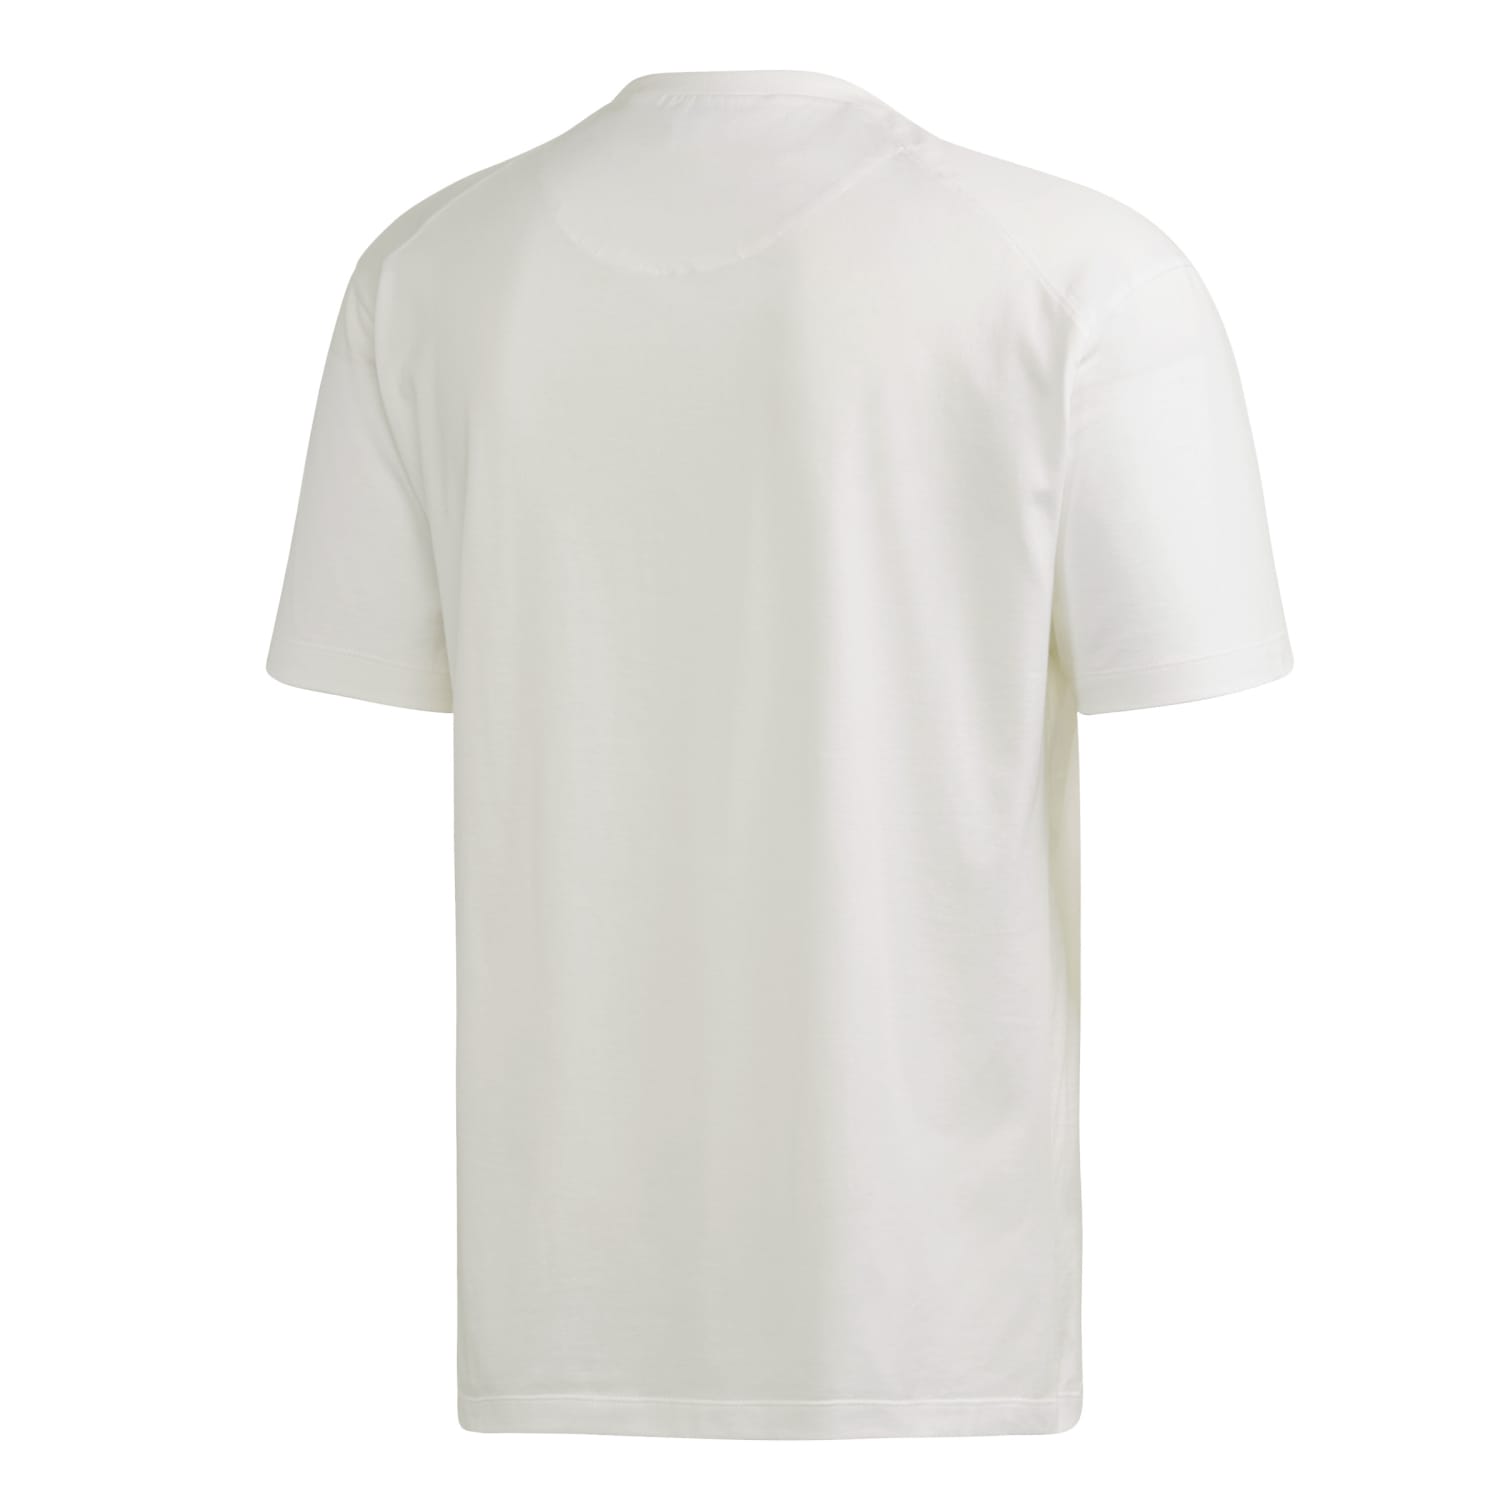 adidas men y 3 cl ss tee white fn3359 492